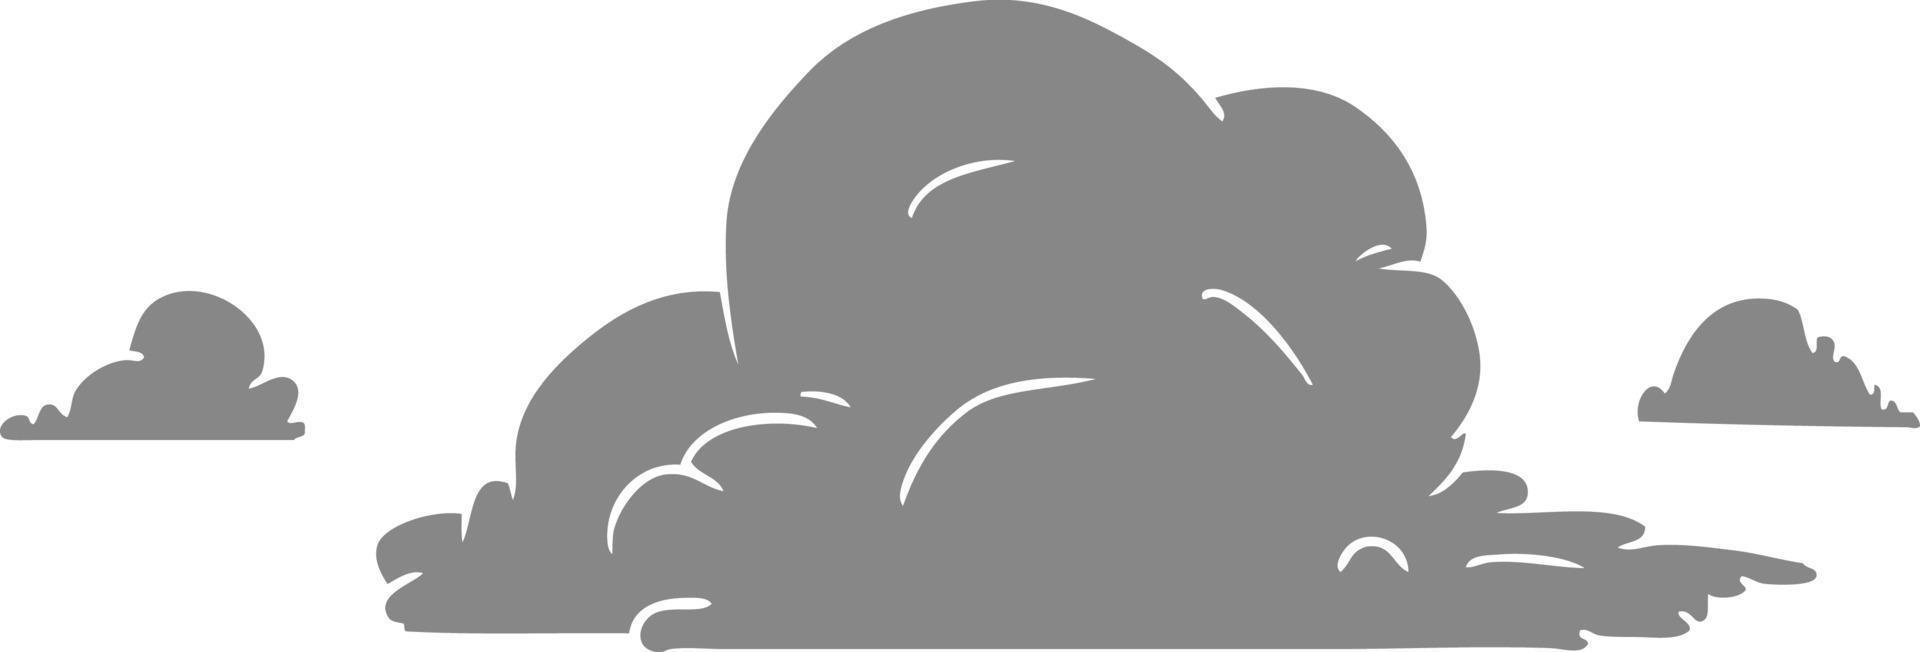 cartoon doodle of white large clouds vector